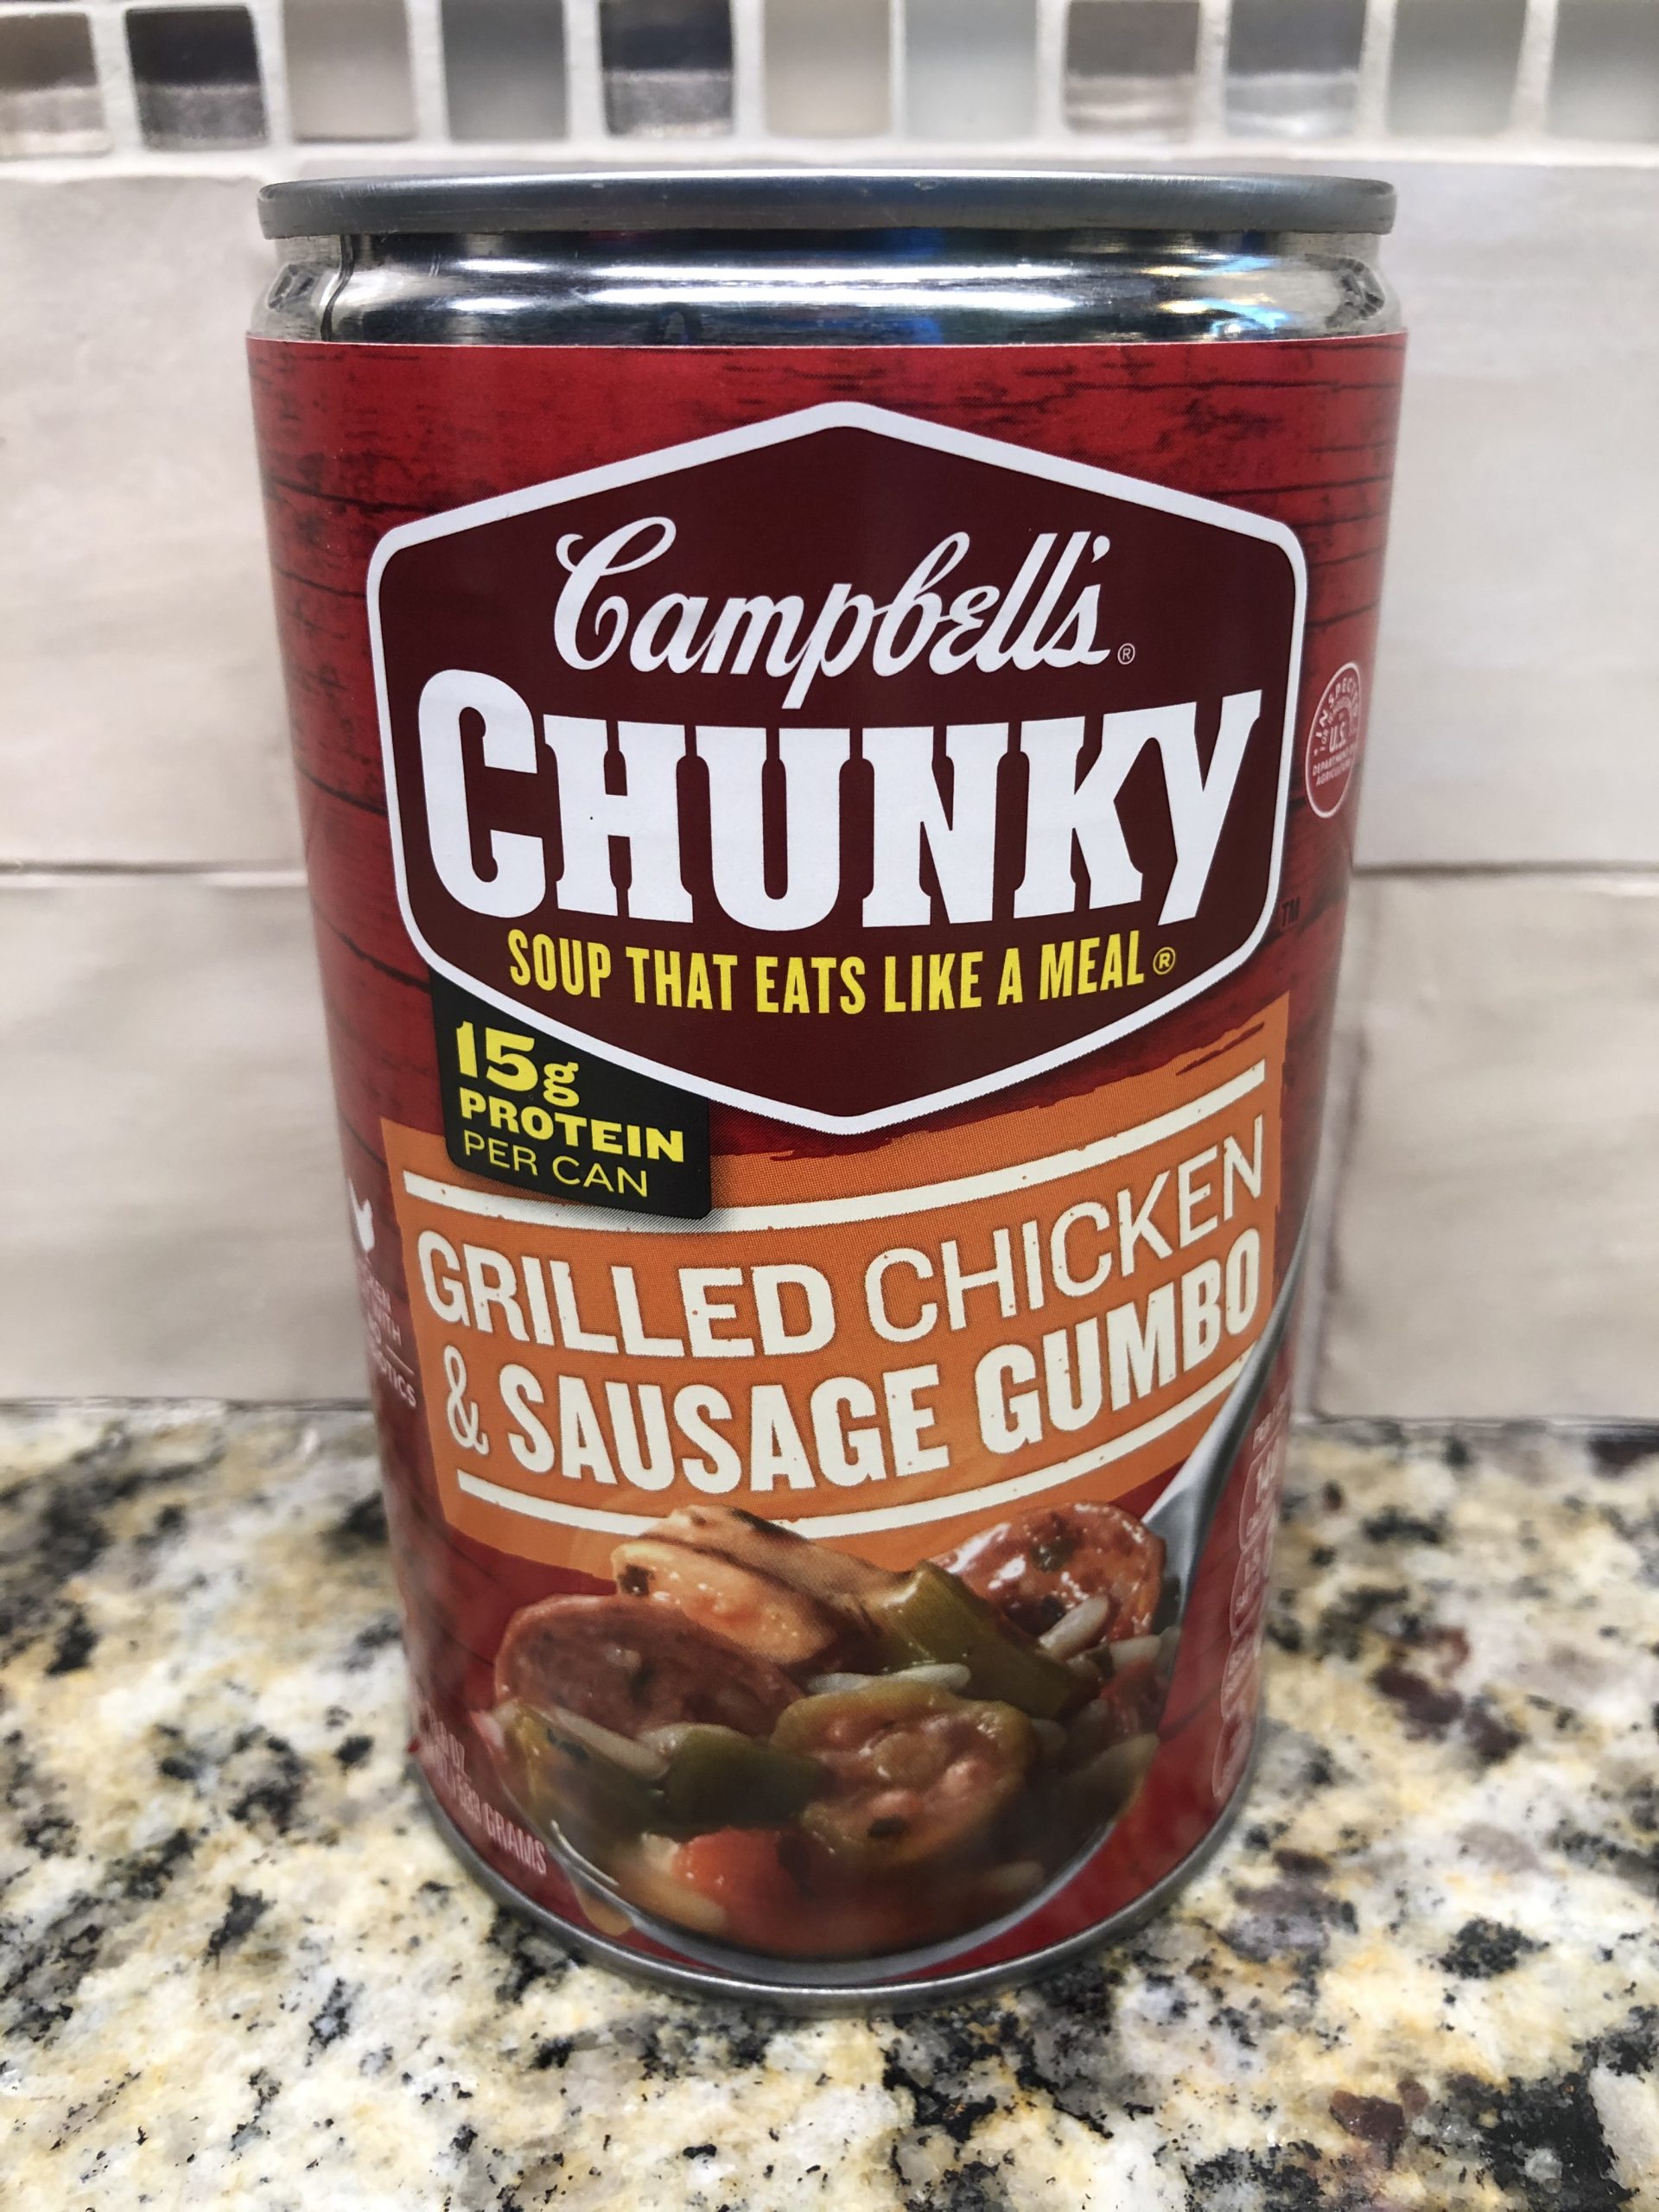 12 Campbell's CHUNKY Grilled Chicken & Sausage Gumbo Soup 18.8 oz Cans ...